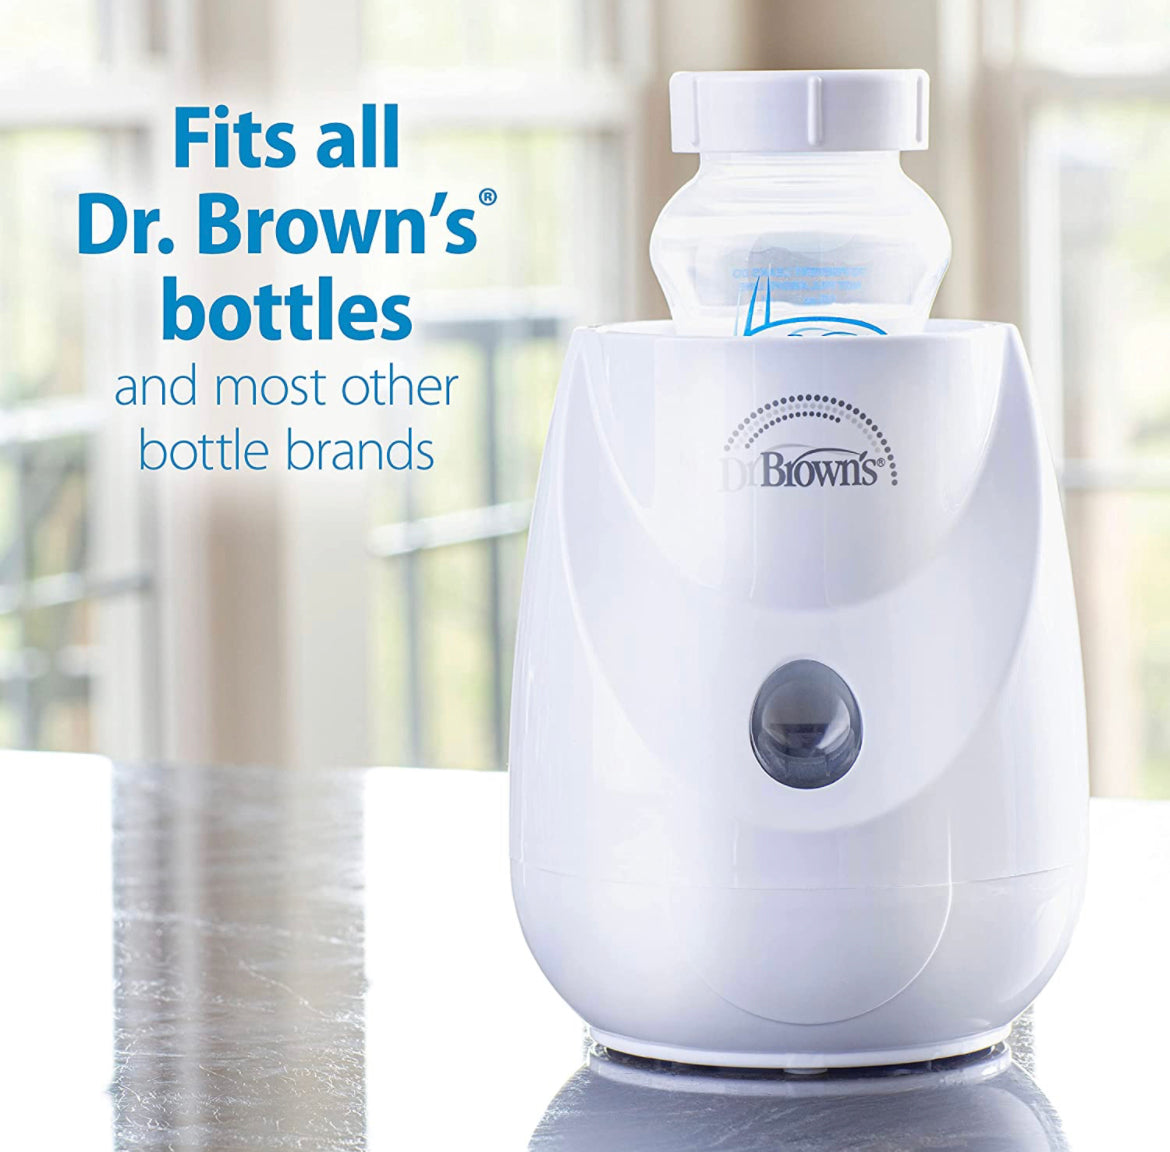 Dr. Brown’s Insta-Feed Bottle Warmer and Sterilizer.